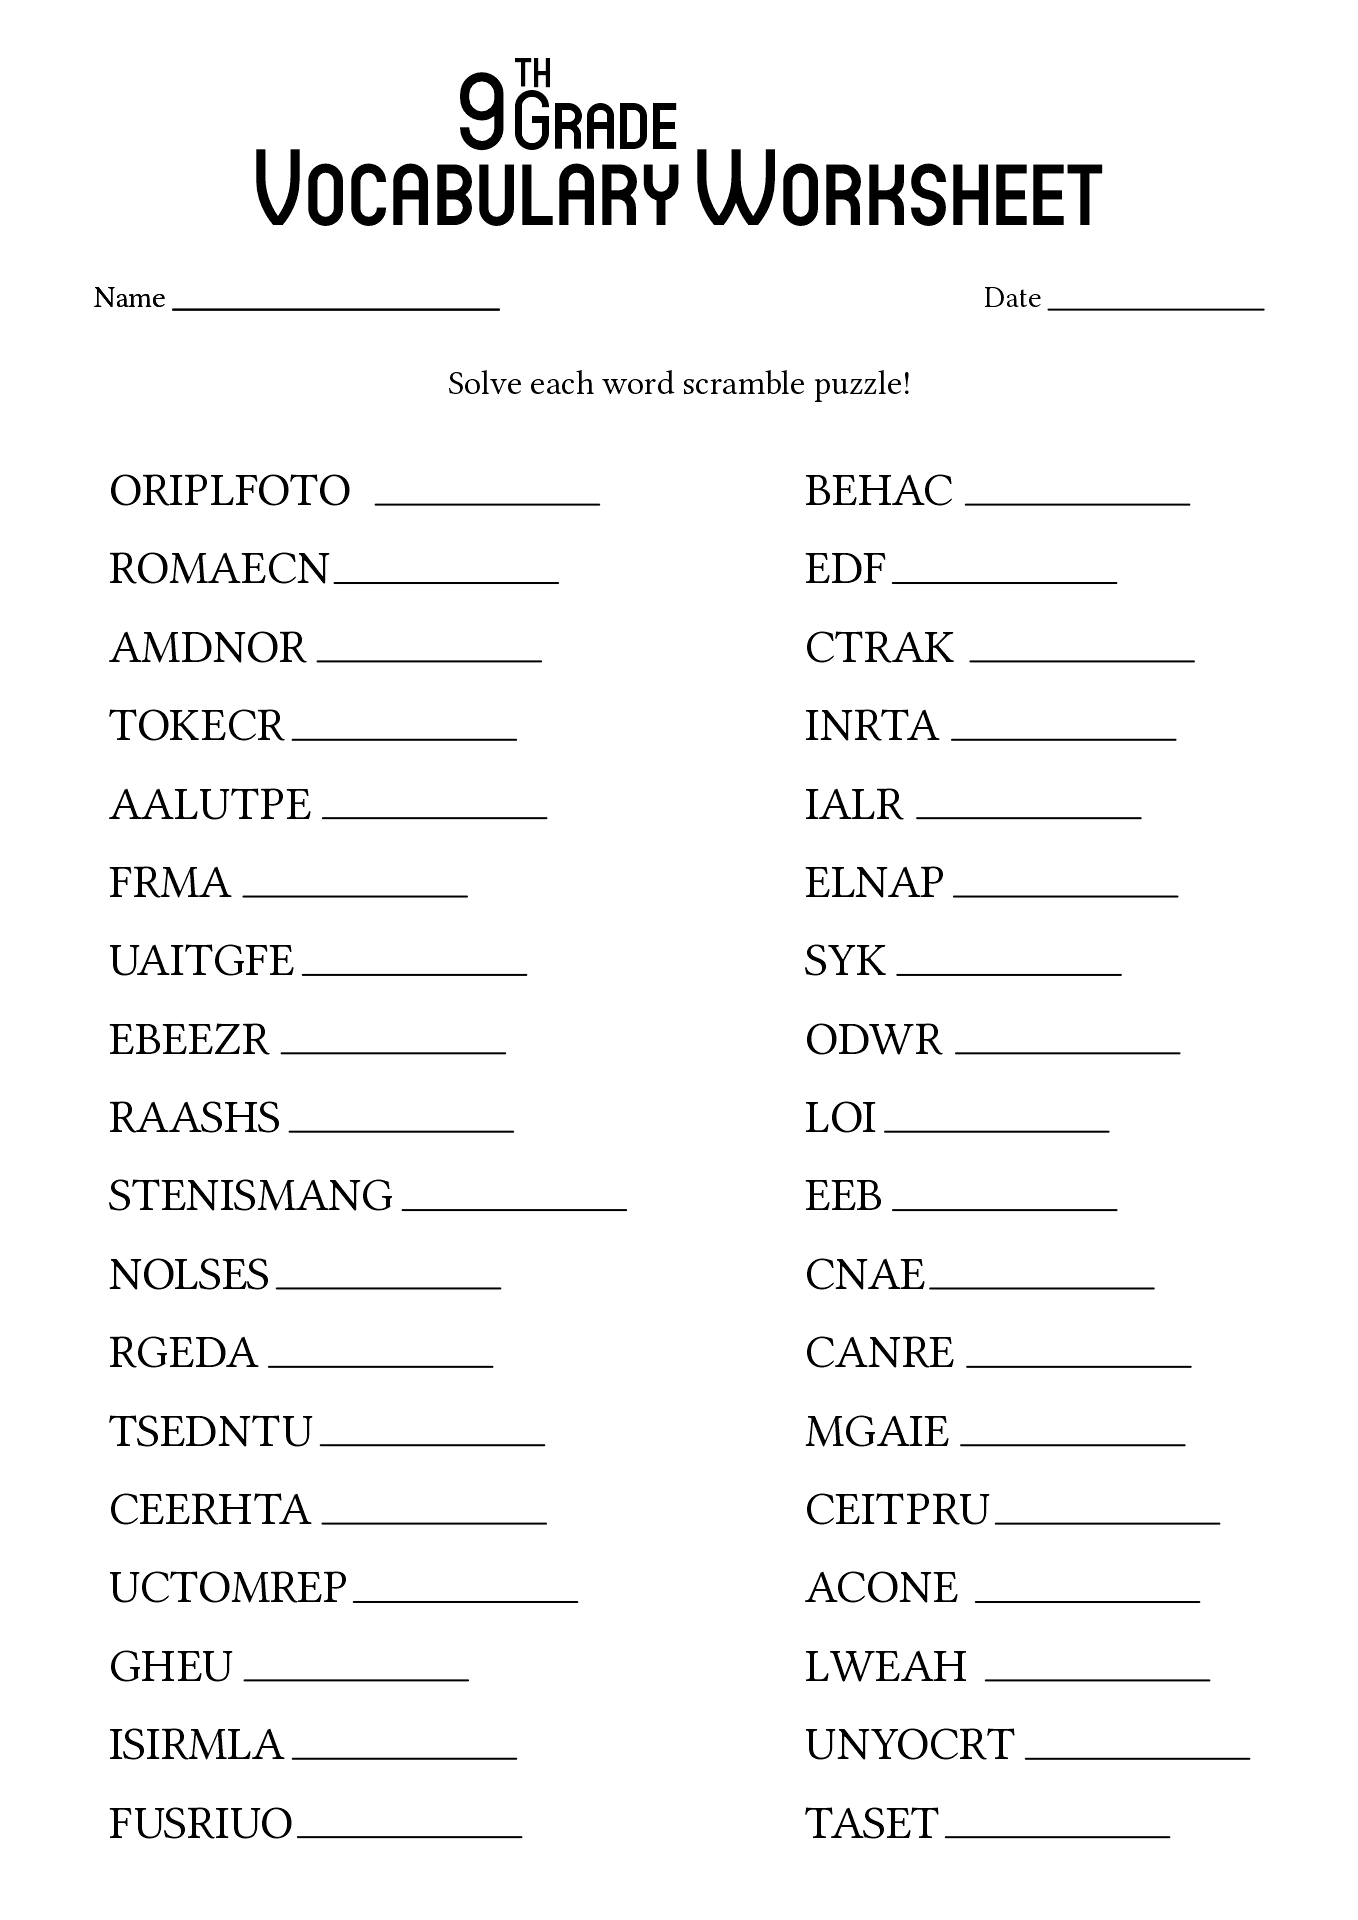 Free 9th Grade Vocabulary Worksheets